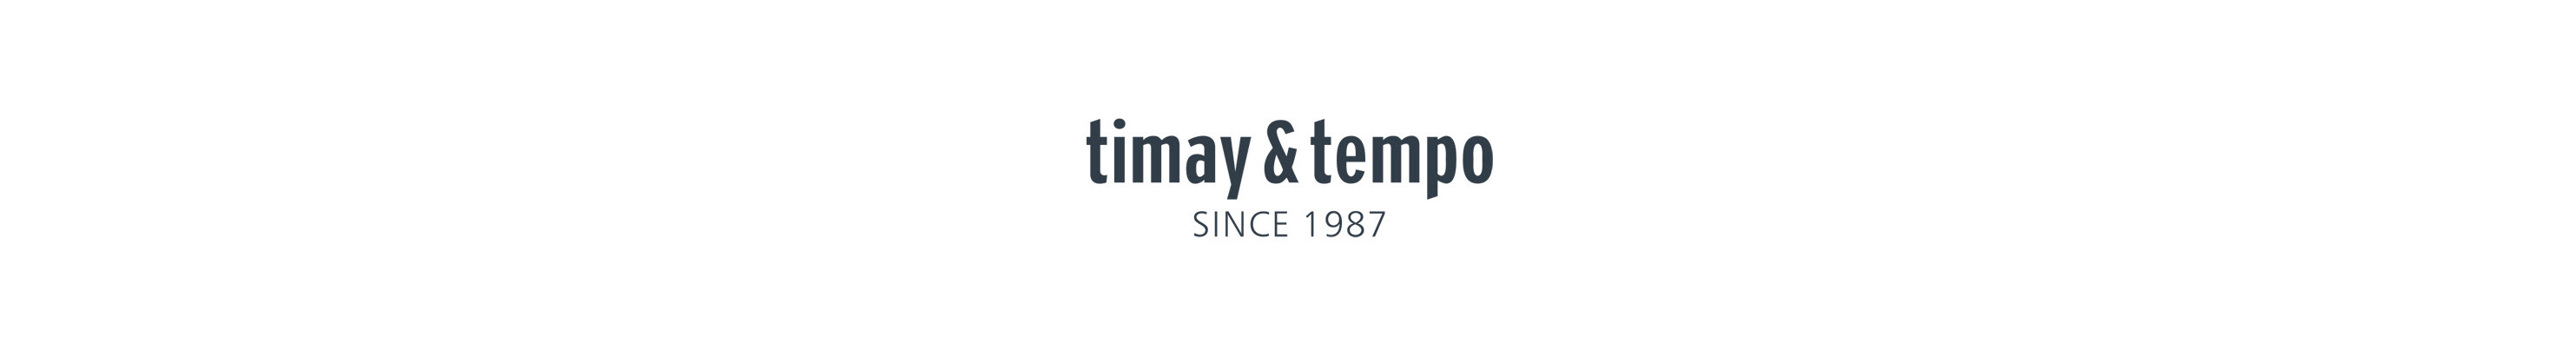 timay tempo's profile banner